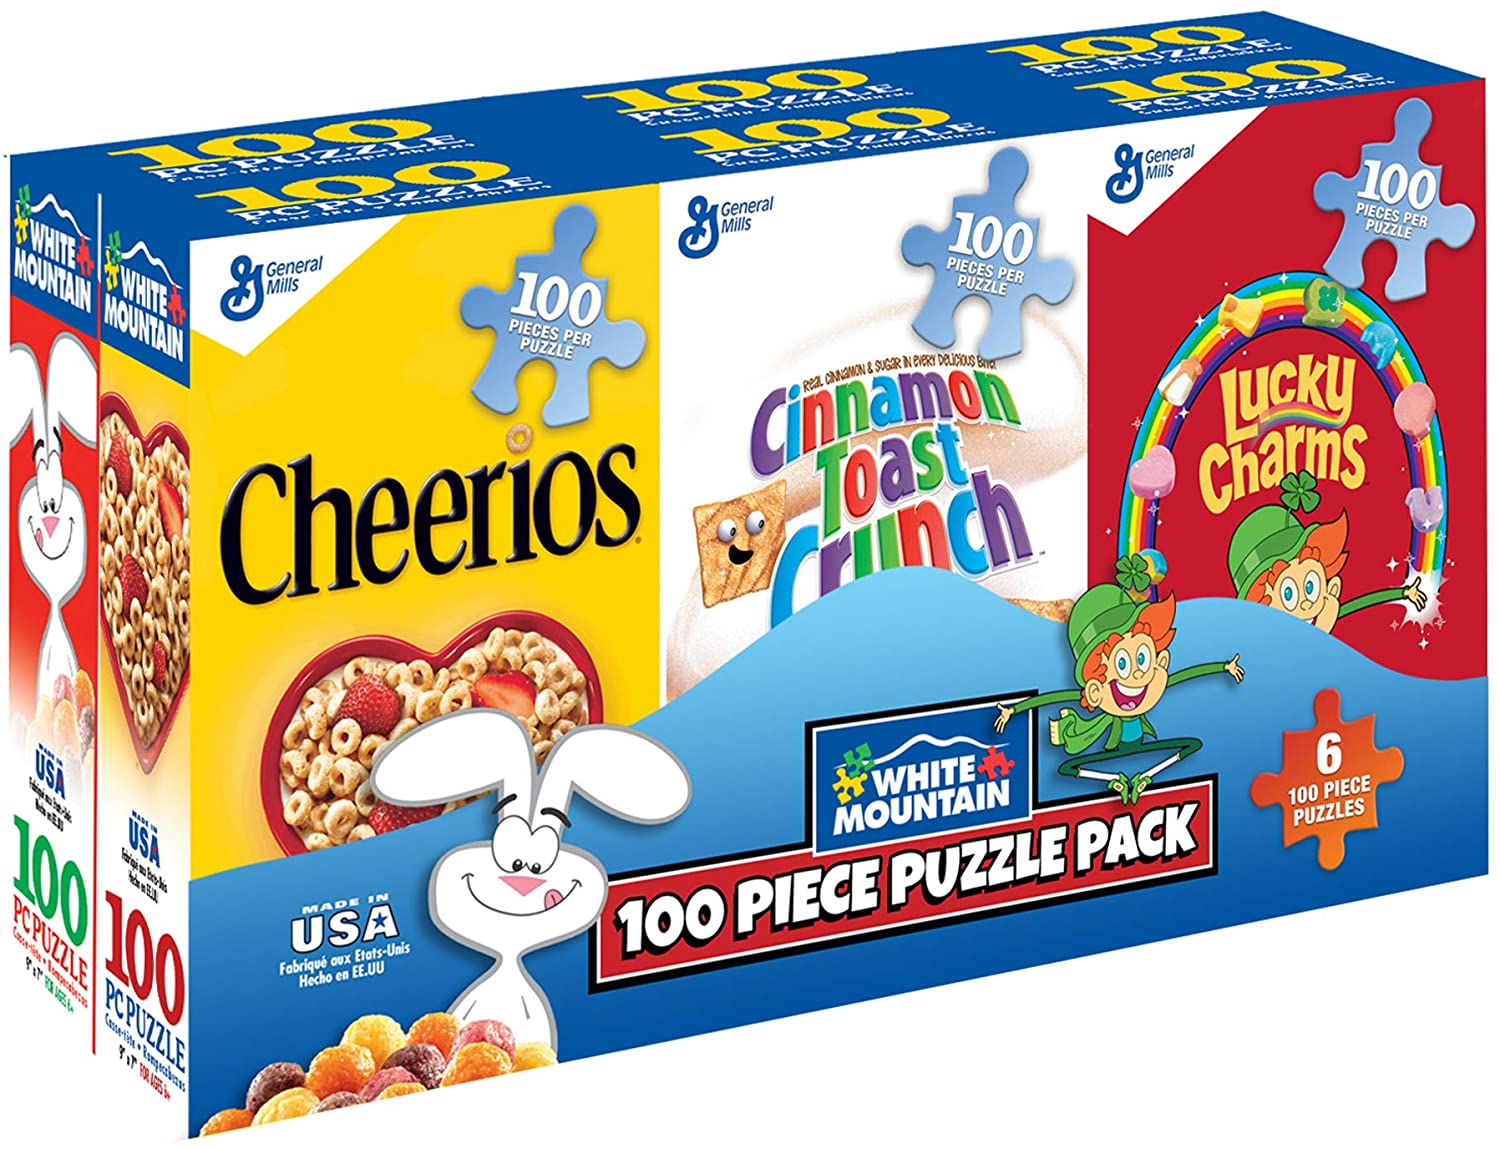 Mini Cereal Boxes 6 in 1 Multipack- Lucky Charms, Cheerios, Honey Nut Cheerios, Cinnamon Toast Crunch, Cocoa Puffs and Trix